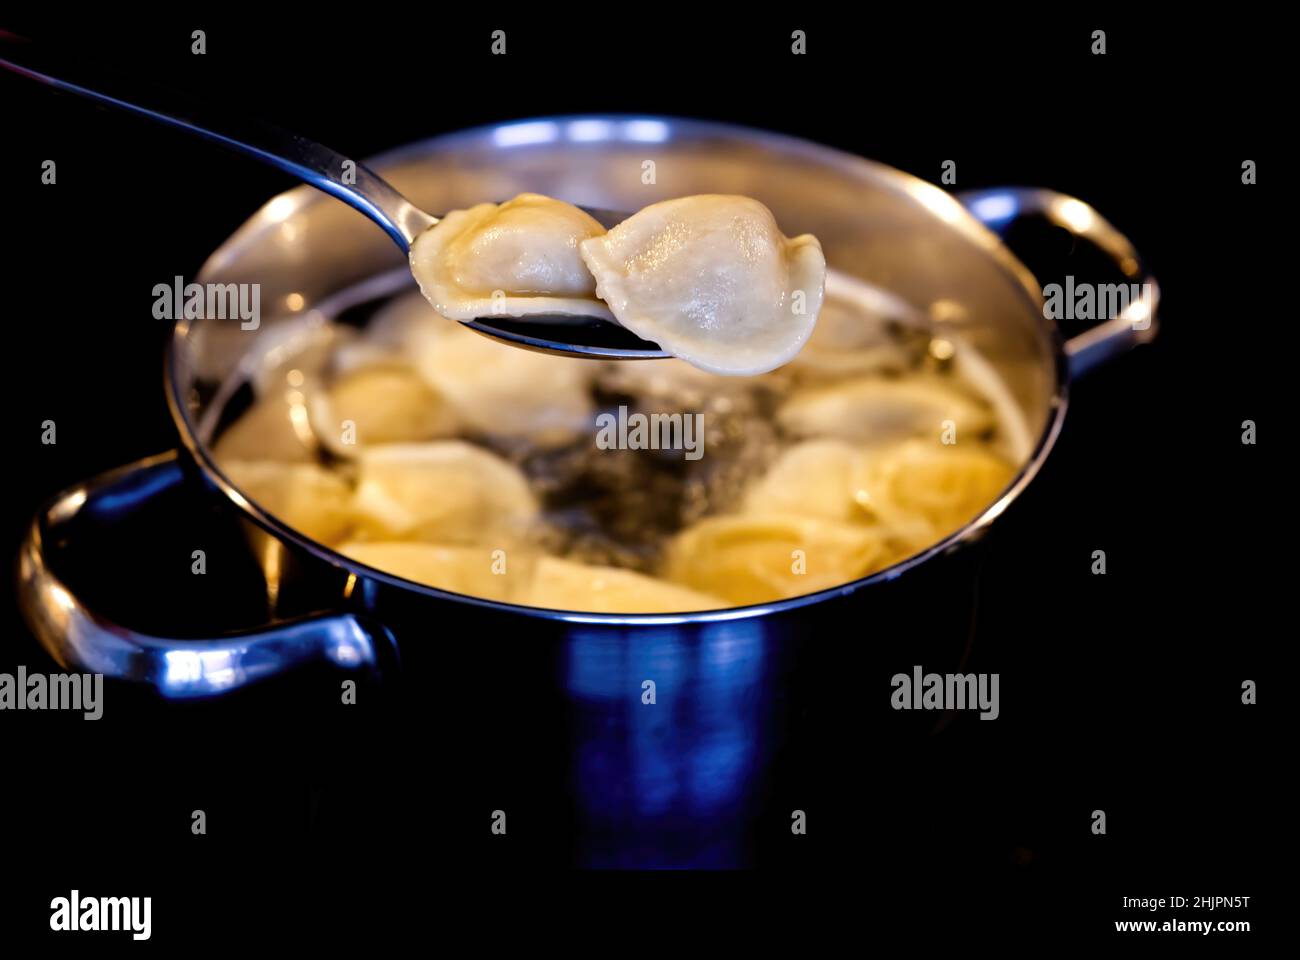 Dumplings mixed with a spoon in a pot of boiling water. Boiled dumplings in a pan. black background Stock Photo